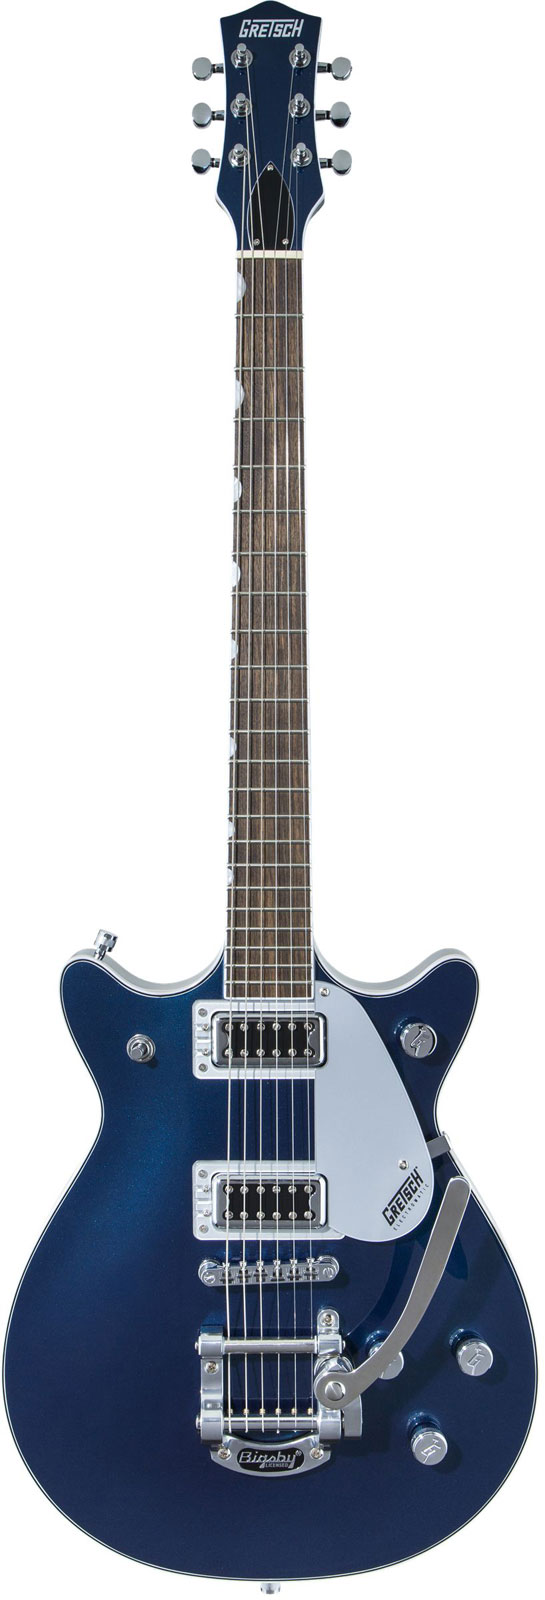 GRETSCH GUITARS G5232T ELECTROMATIC DOUBLE JET FT WITH BIGSBY LRL, MIDNIGHT SAPPHIRE